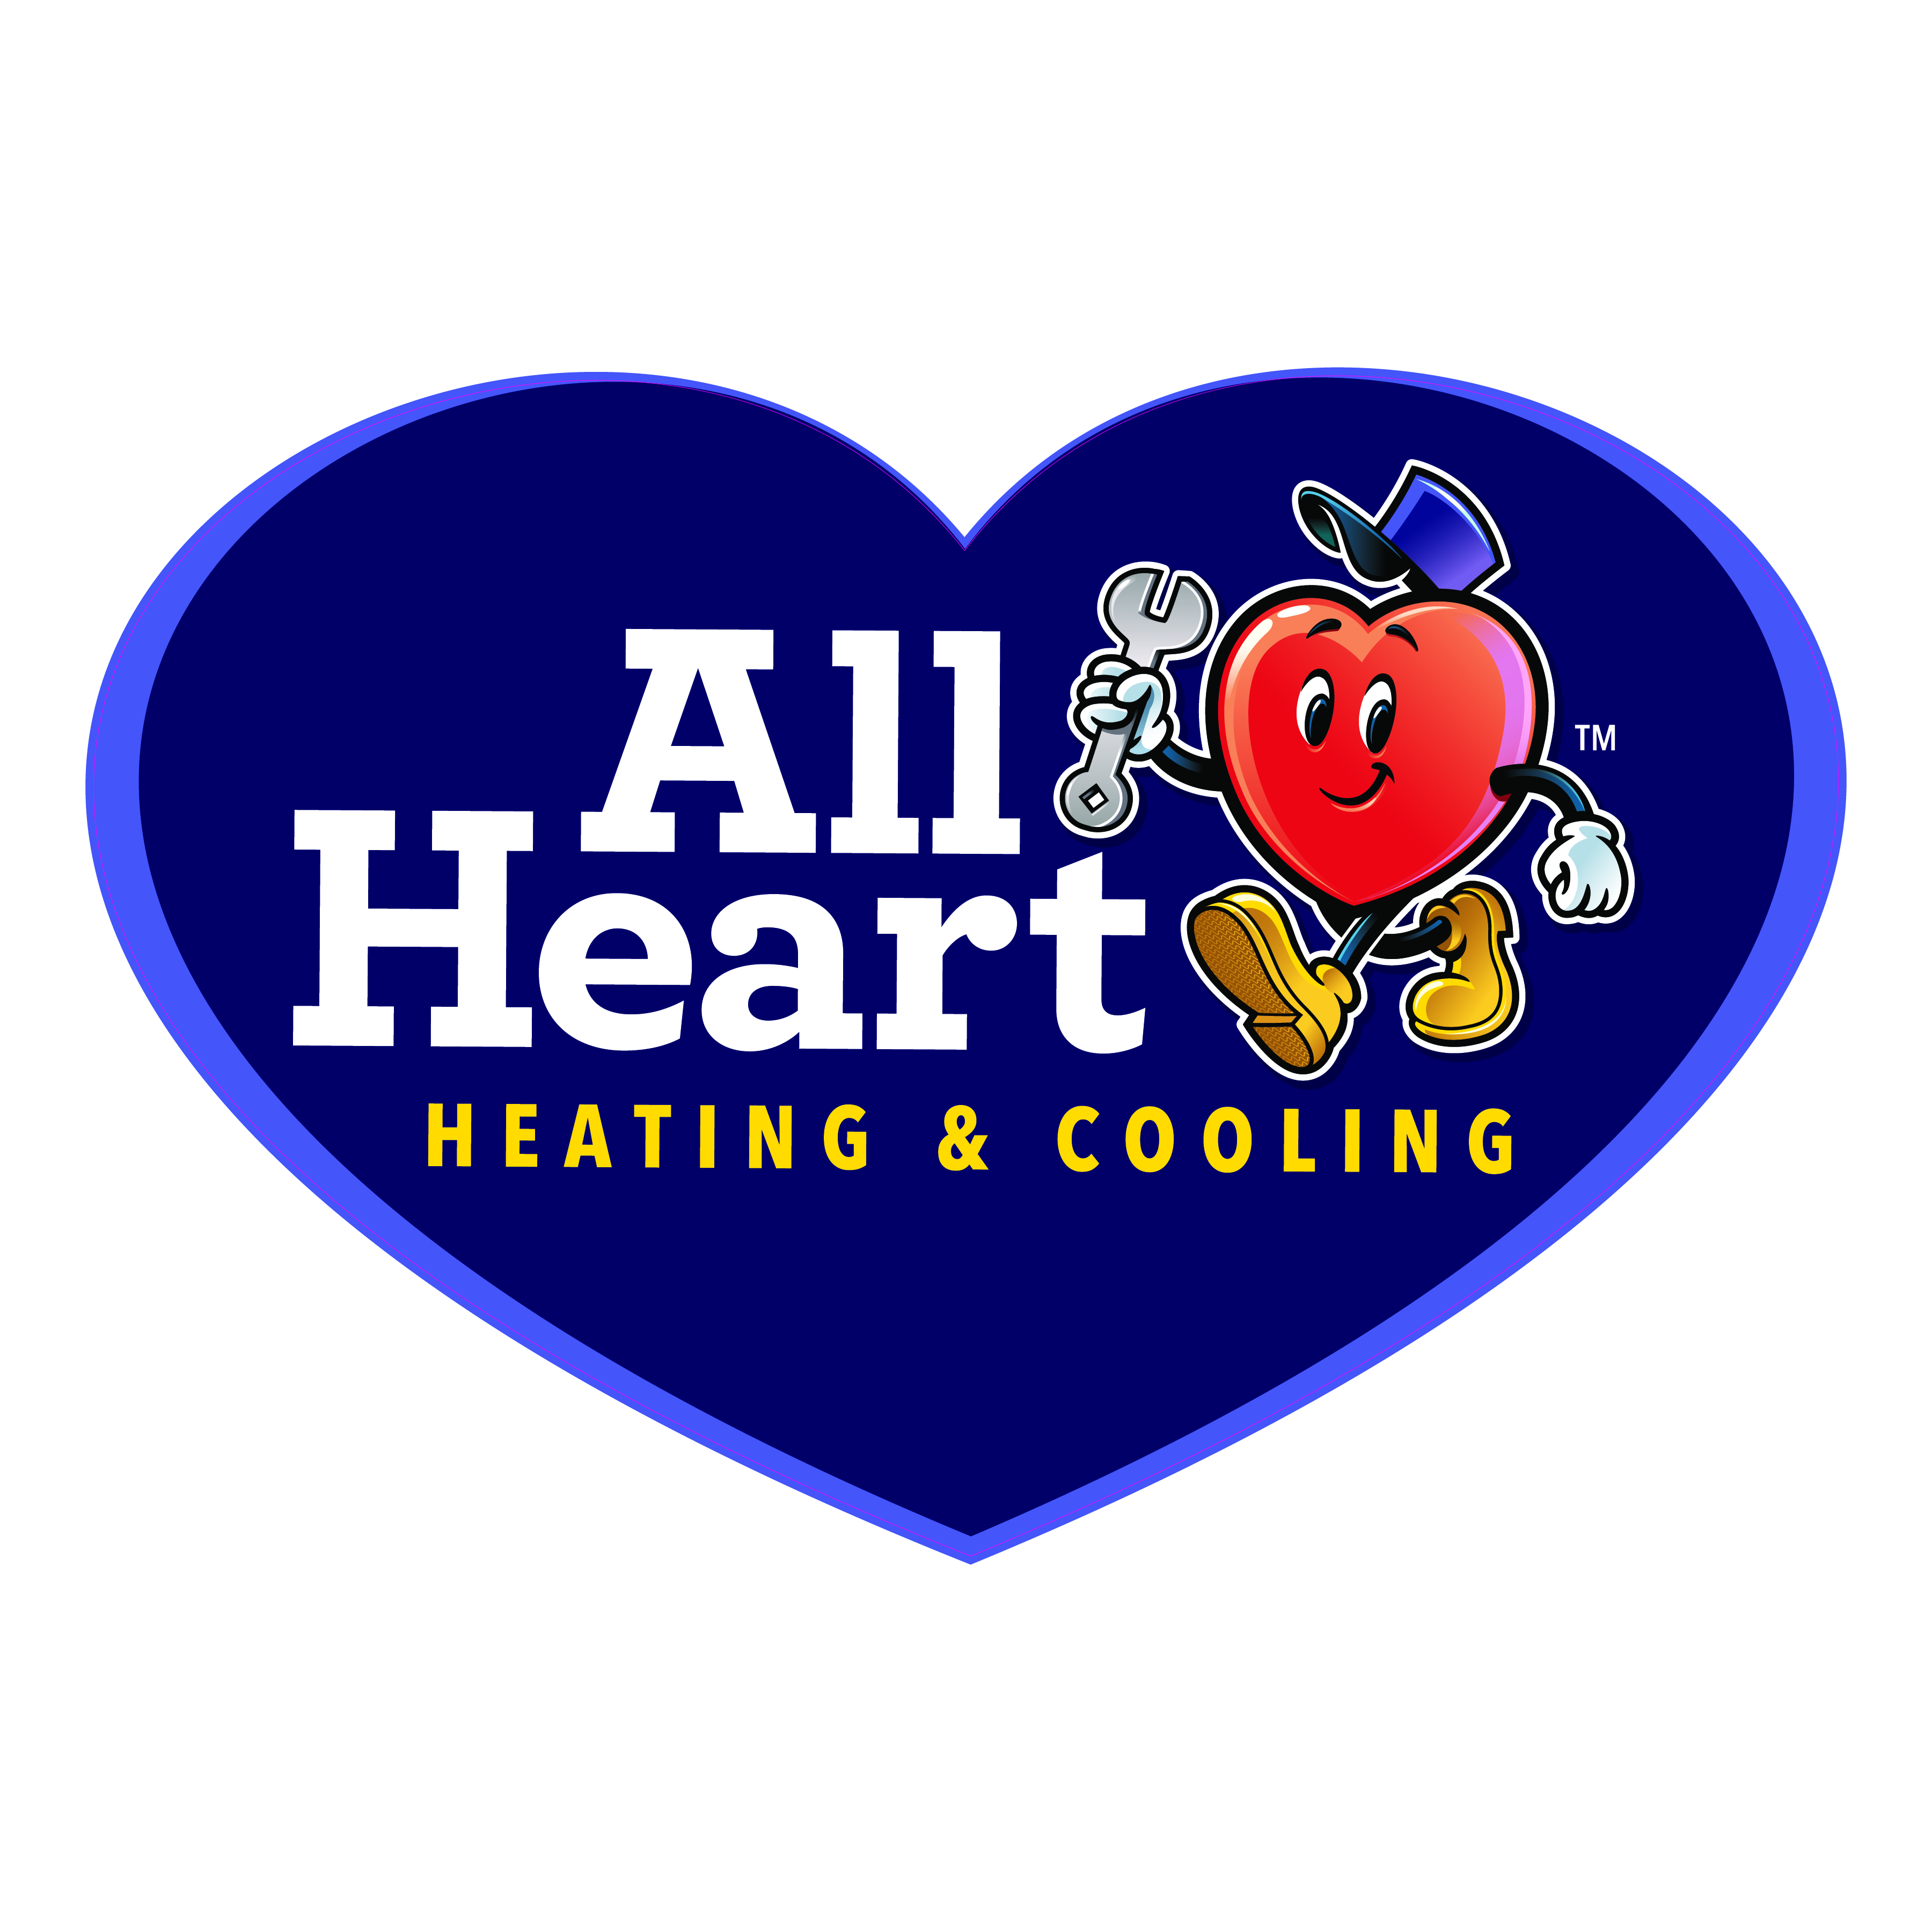 All Heart heating & Cooling